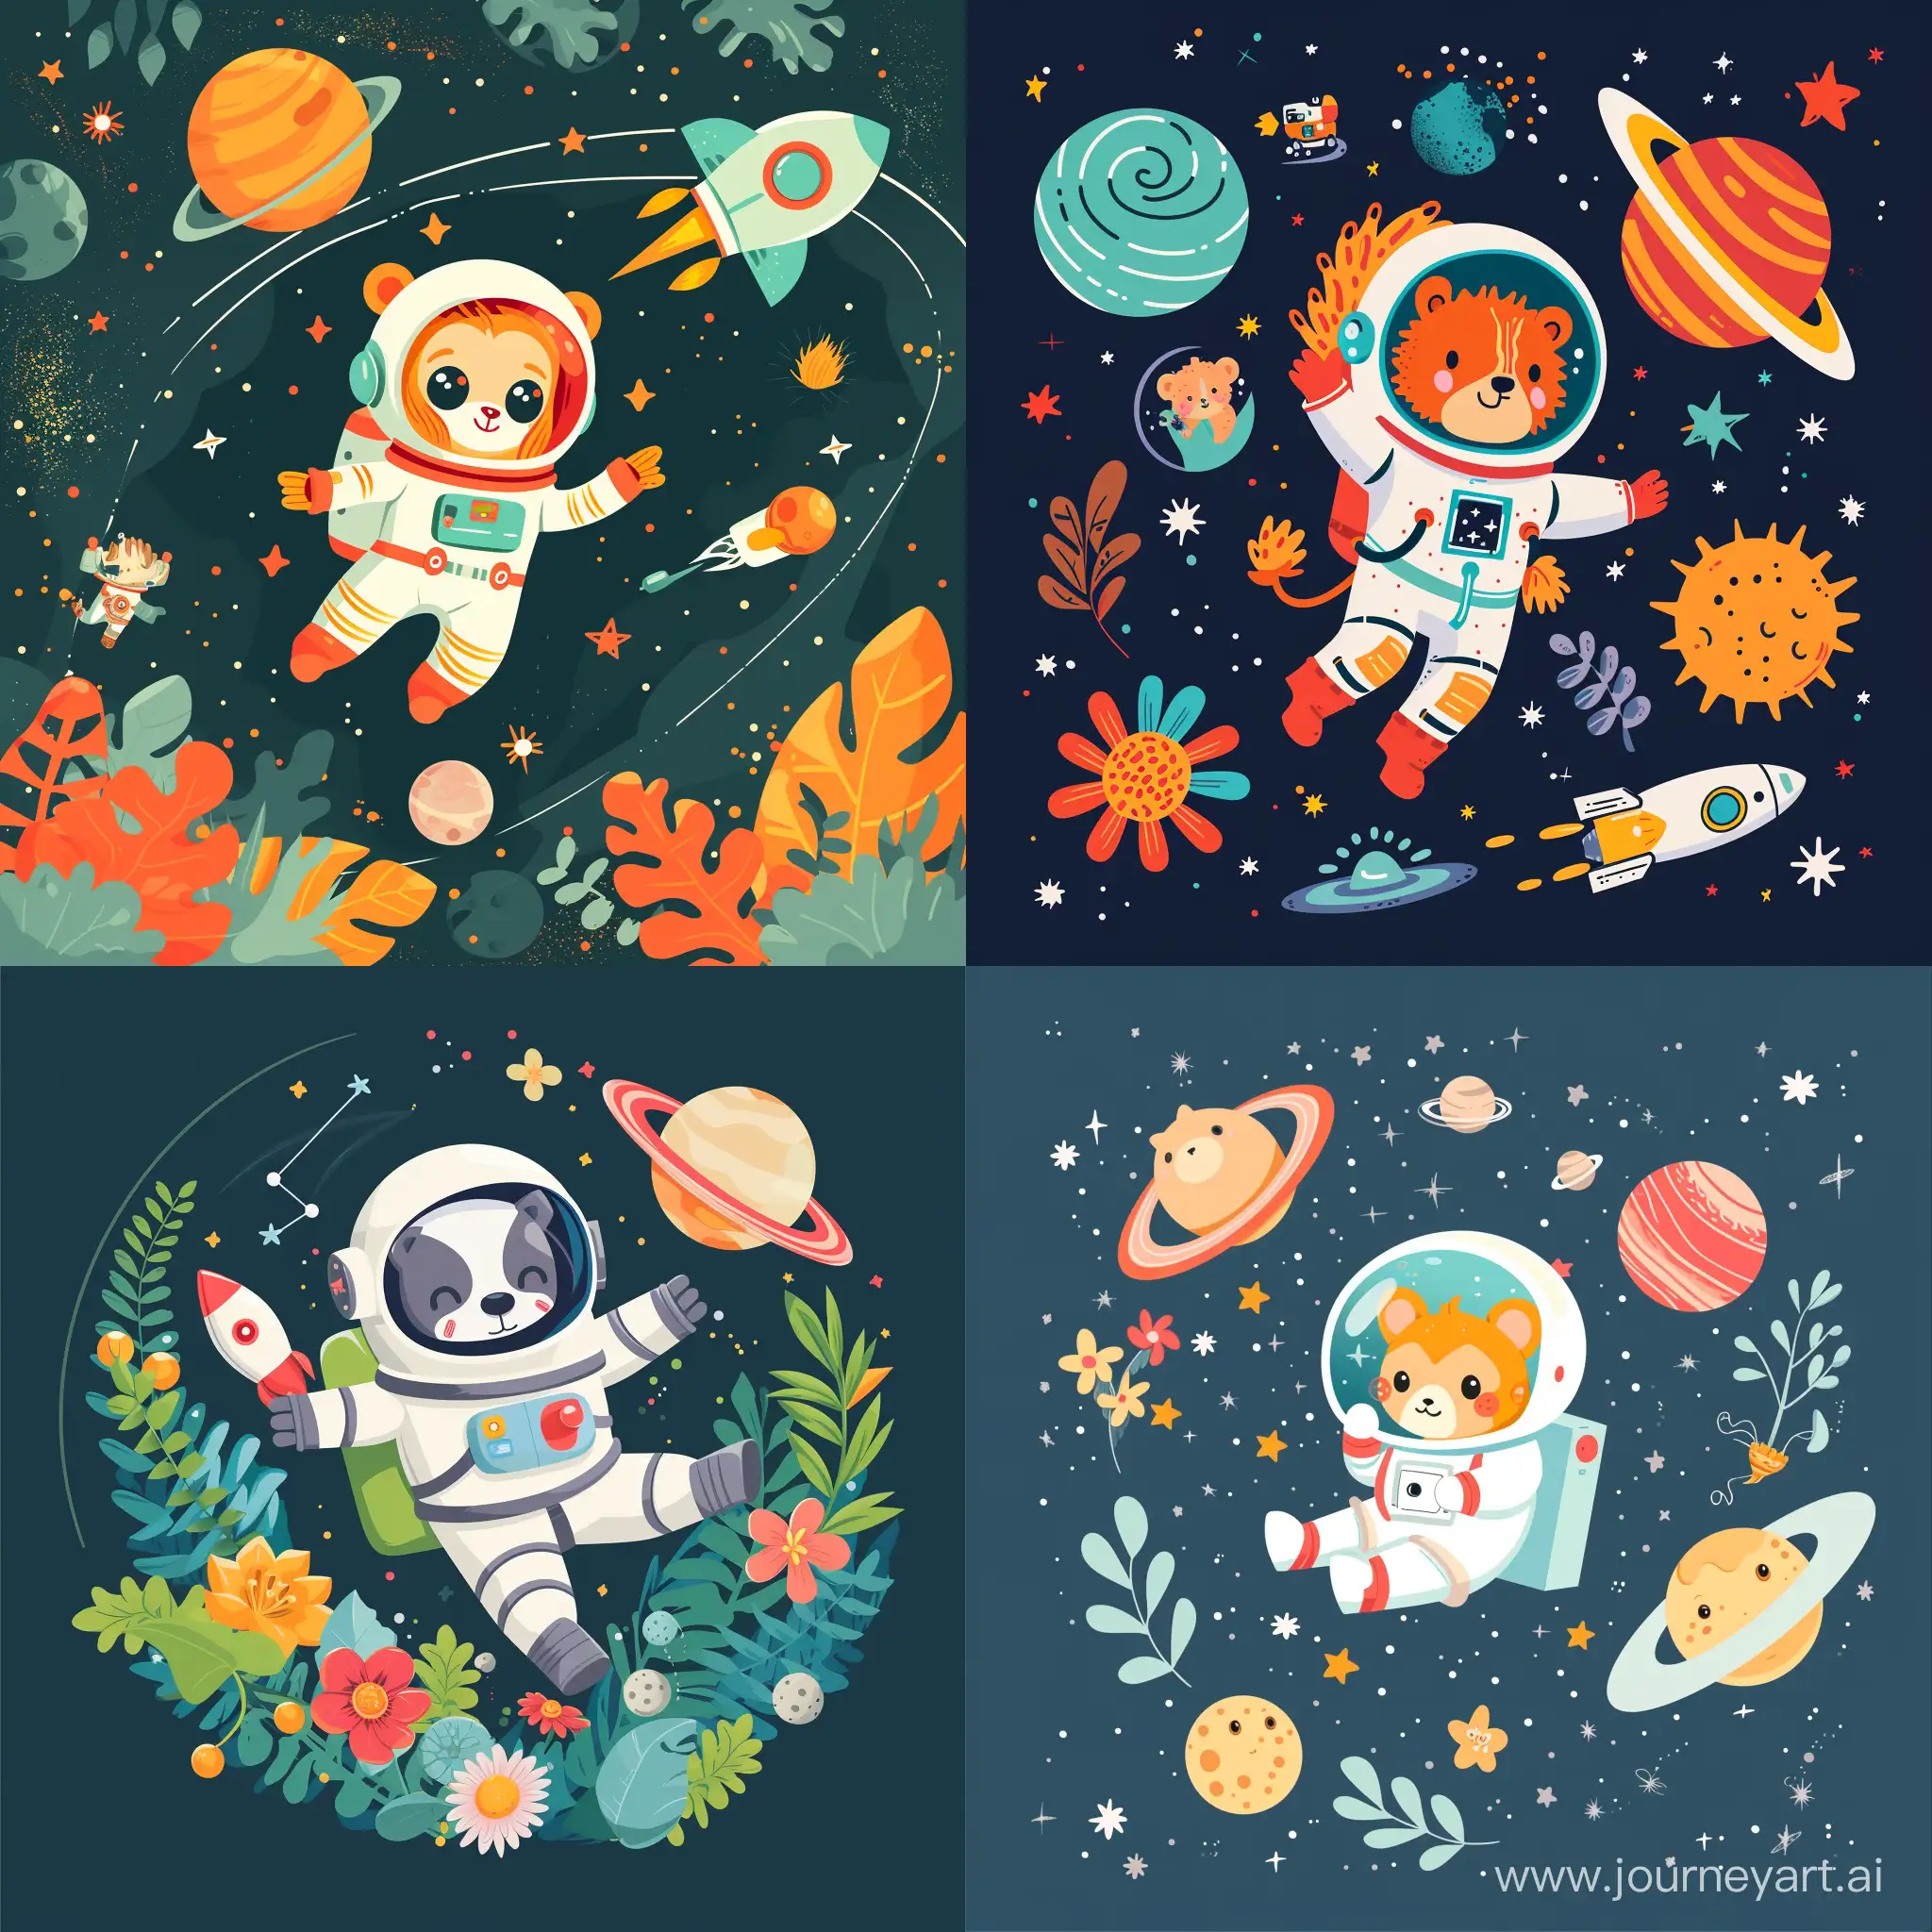 Create  a  playful  printable  sticker  design  of  a  cute  animal  astronaut  exploring  
space,  combining  the  wonders  of  nature  and  the  universe  in  a  delightful  way